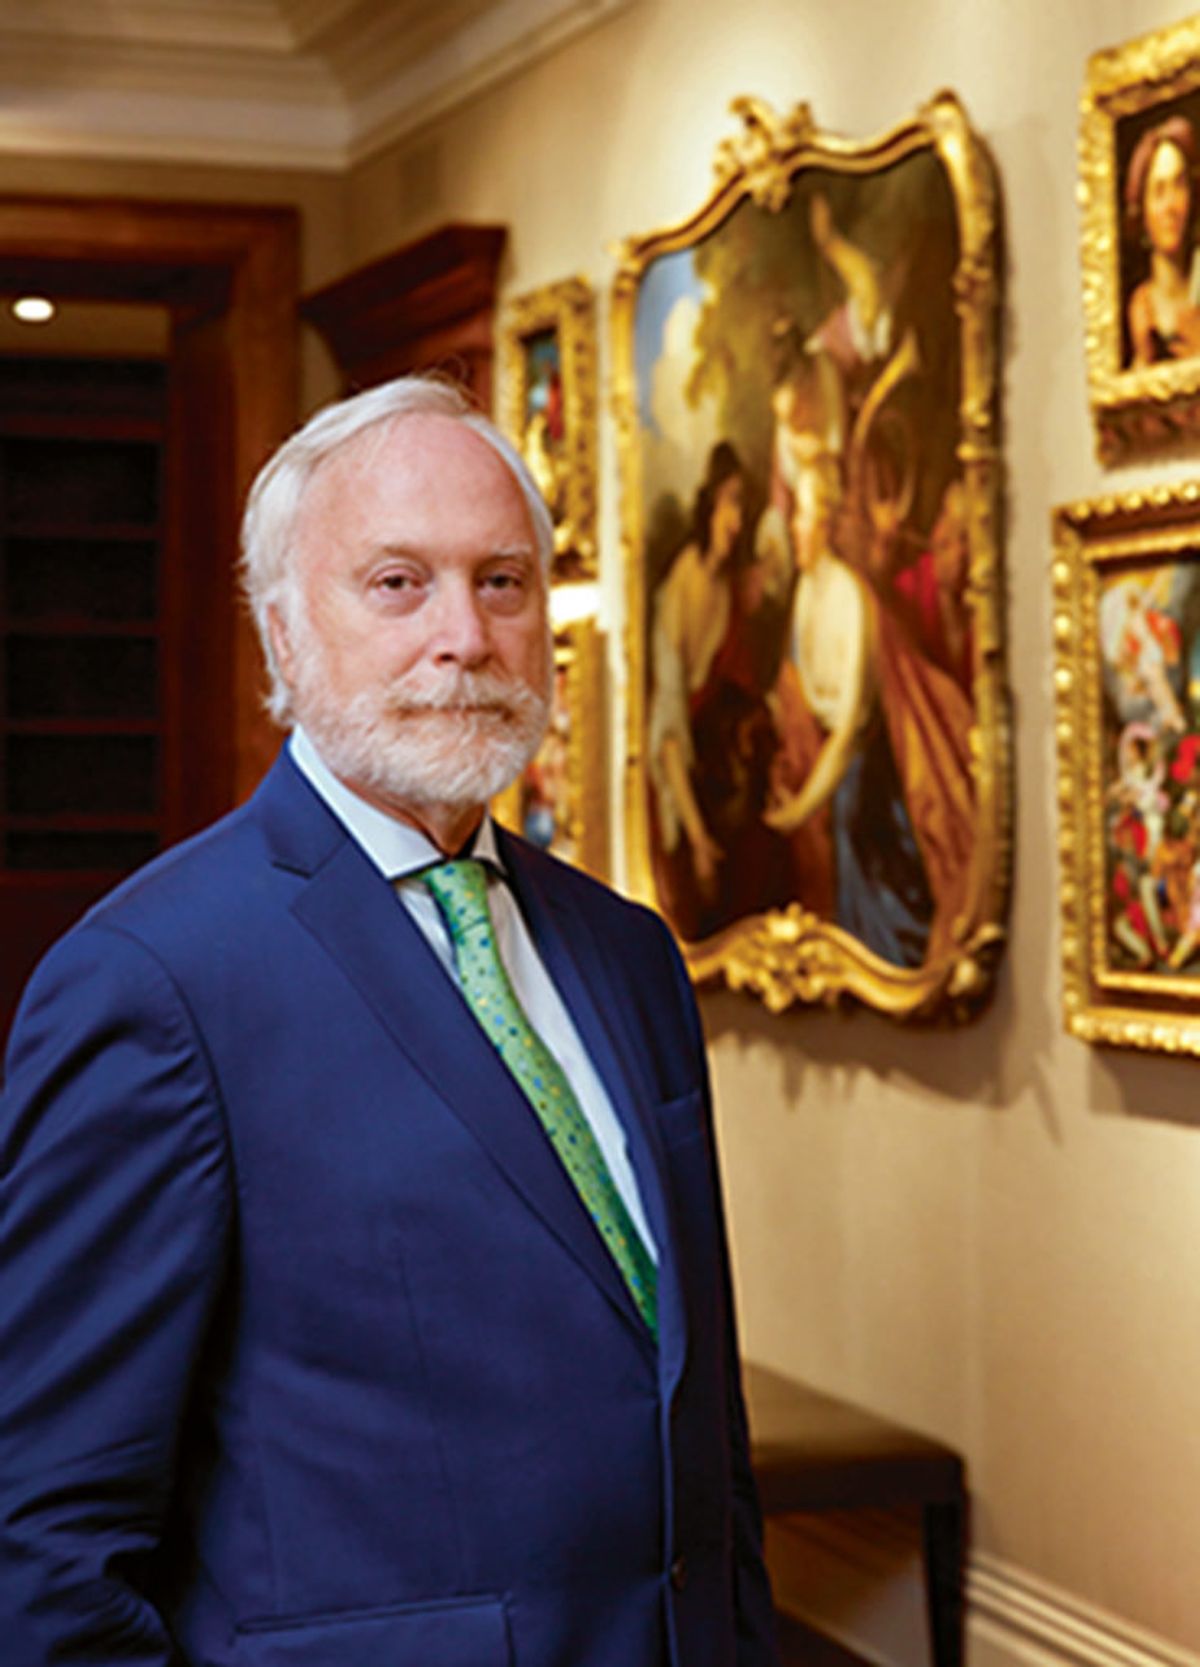 After a short-lived retirement, former dealer Otto Naumann will join Sotheby's at the end of the summer Sotheby's